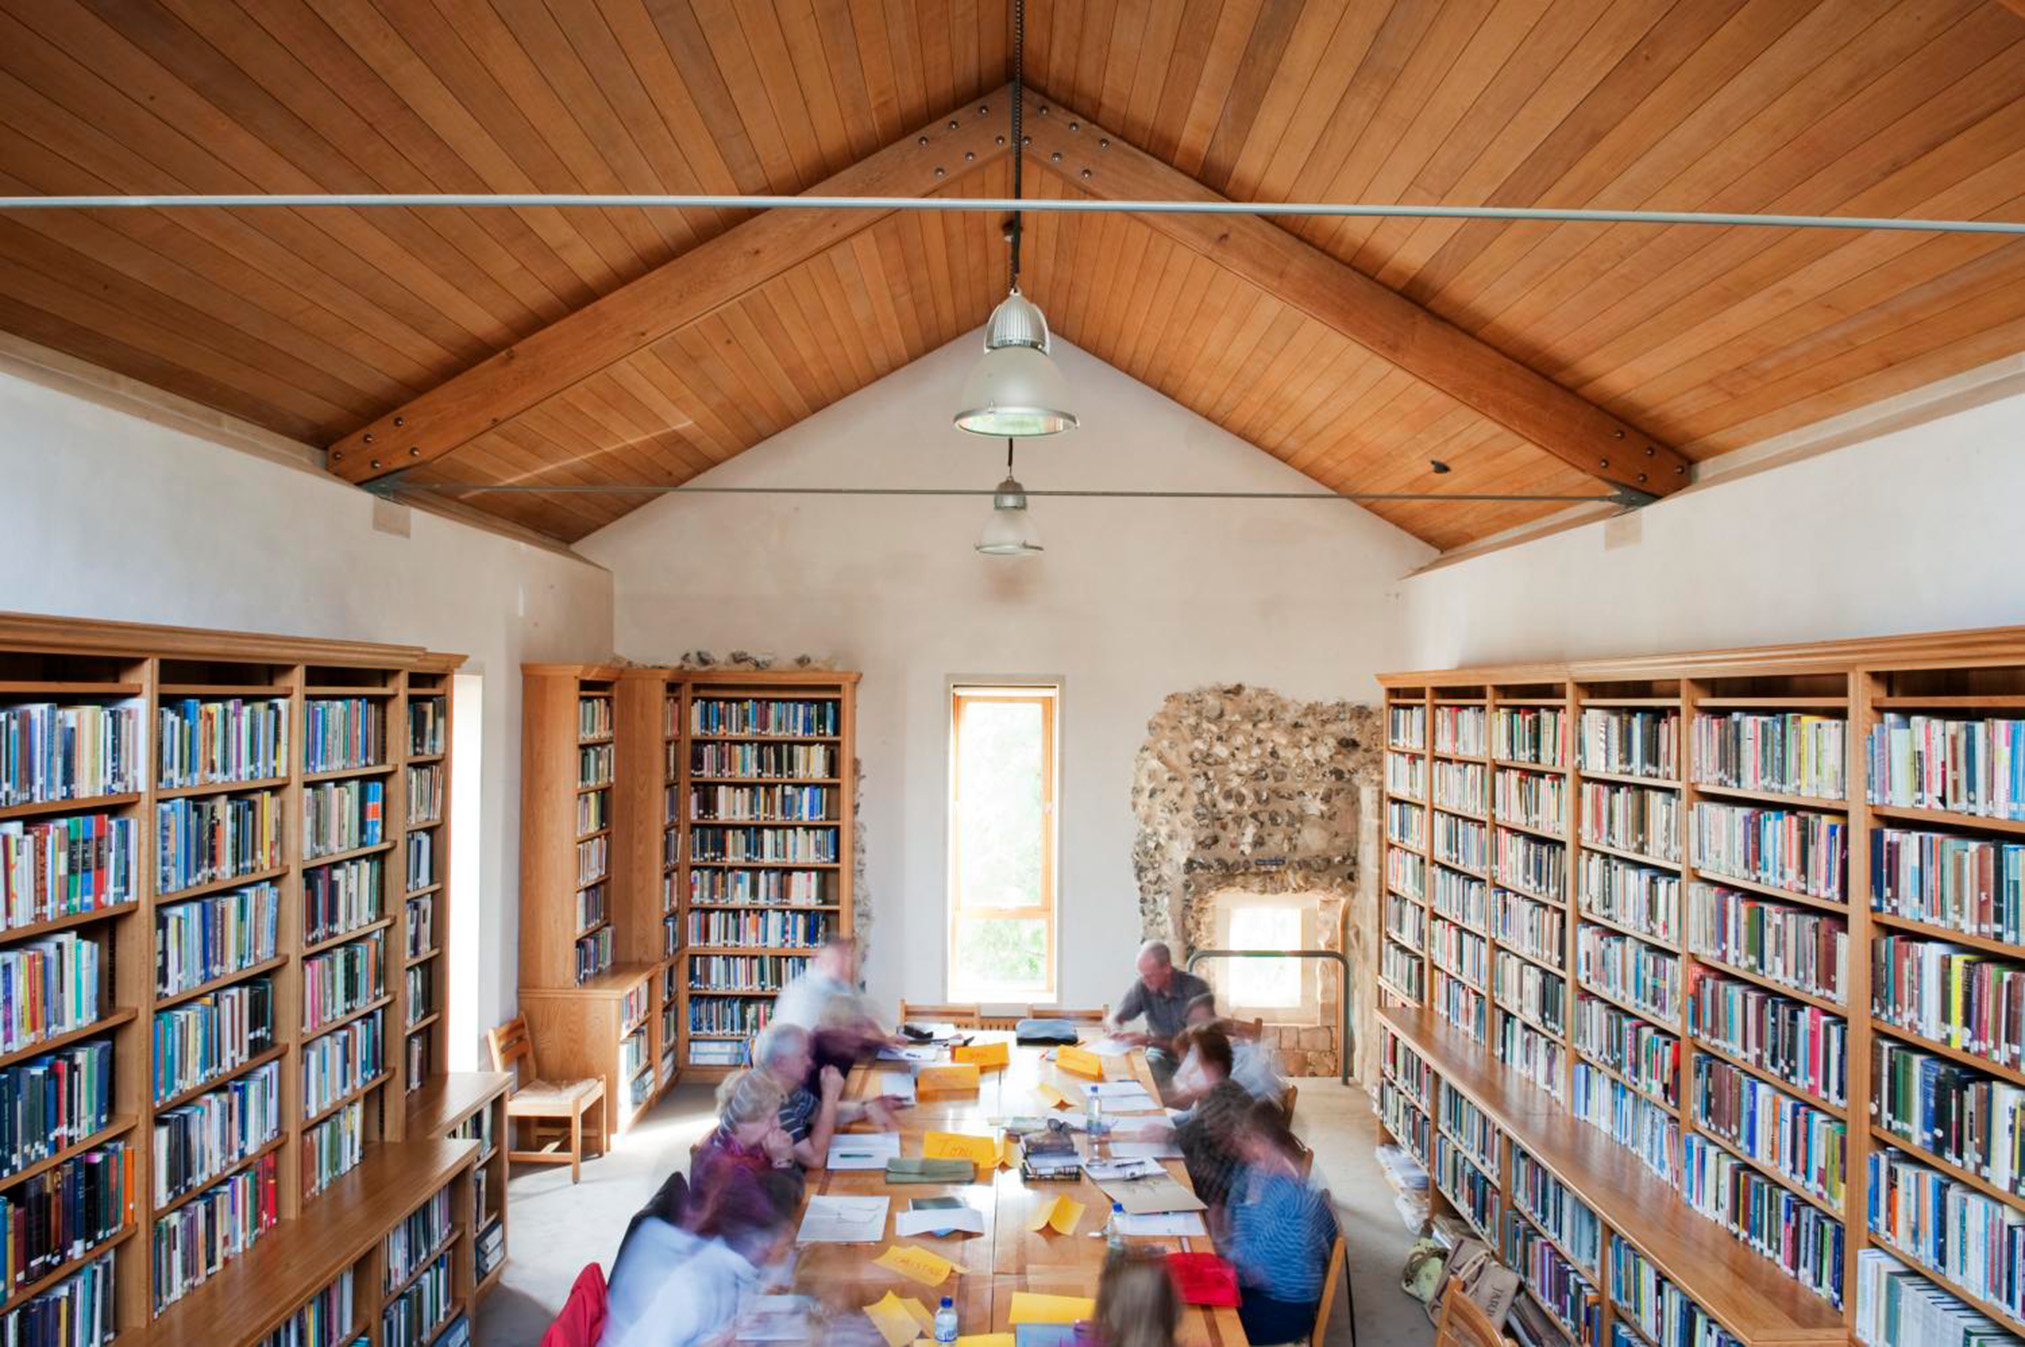 Bookshelves line the walls of a library with a wood panelled ceiling people work at a long table in the centre of the room. The people in the image are blurred by a long exposure and are unidentifiable.